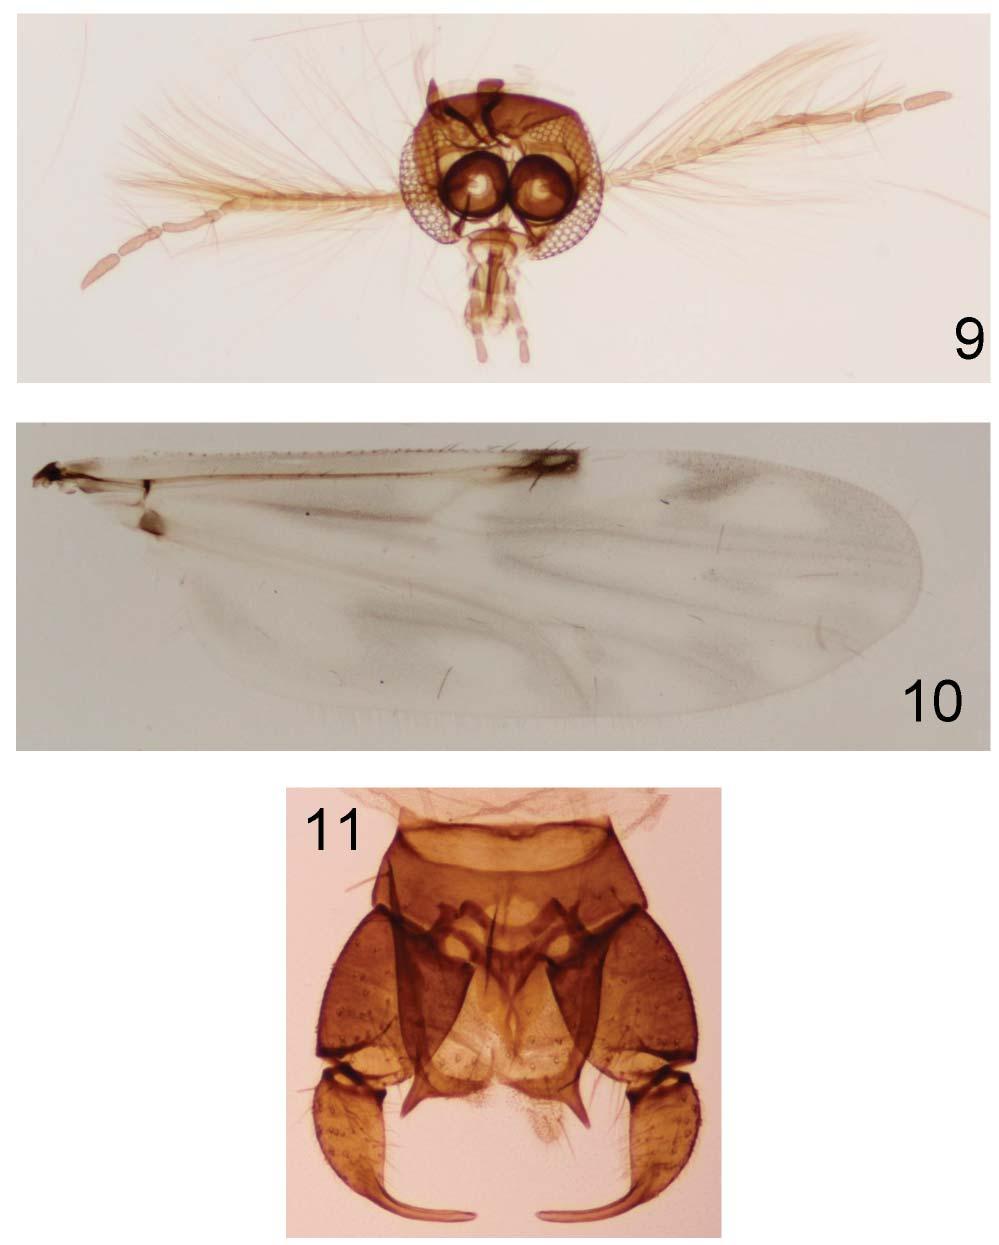 A REVISION OF THE BITING MIDGES INSECTA MUNDI 0441, August 2015 17 Figures 9 11.